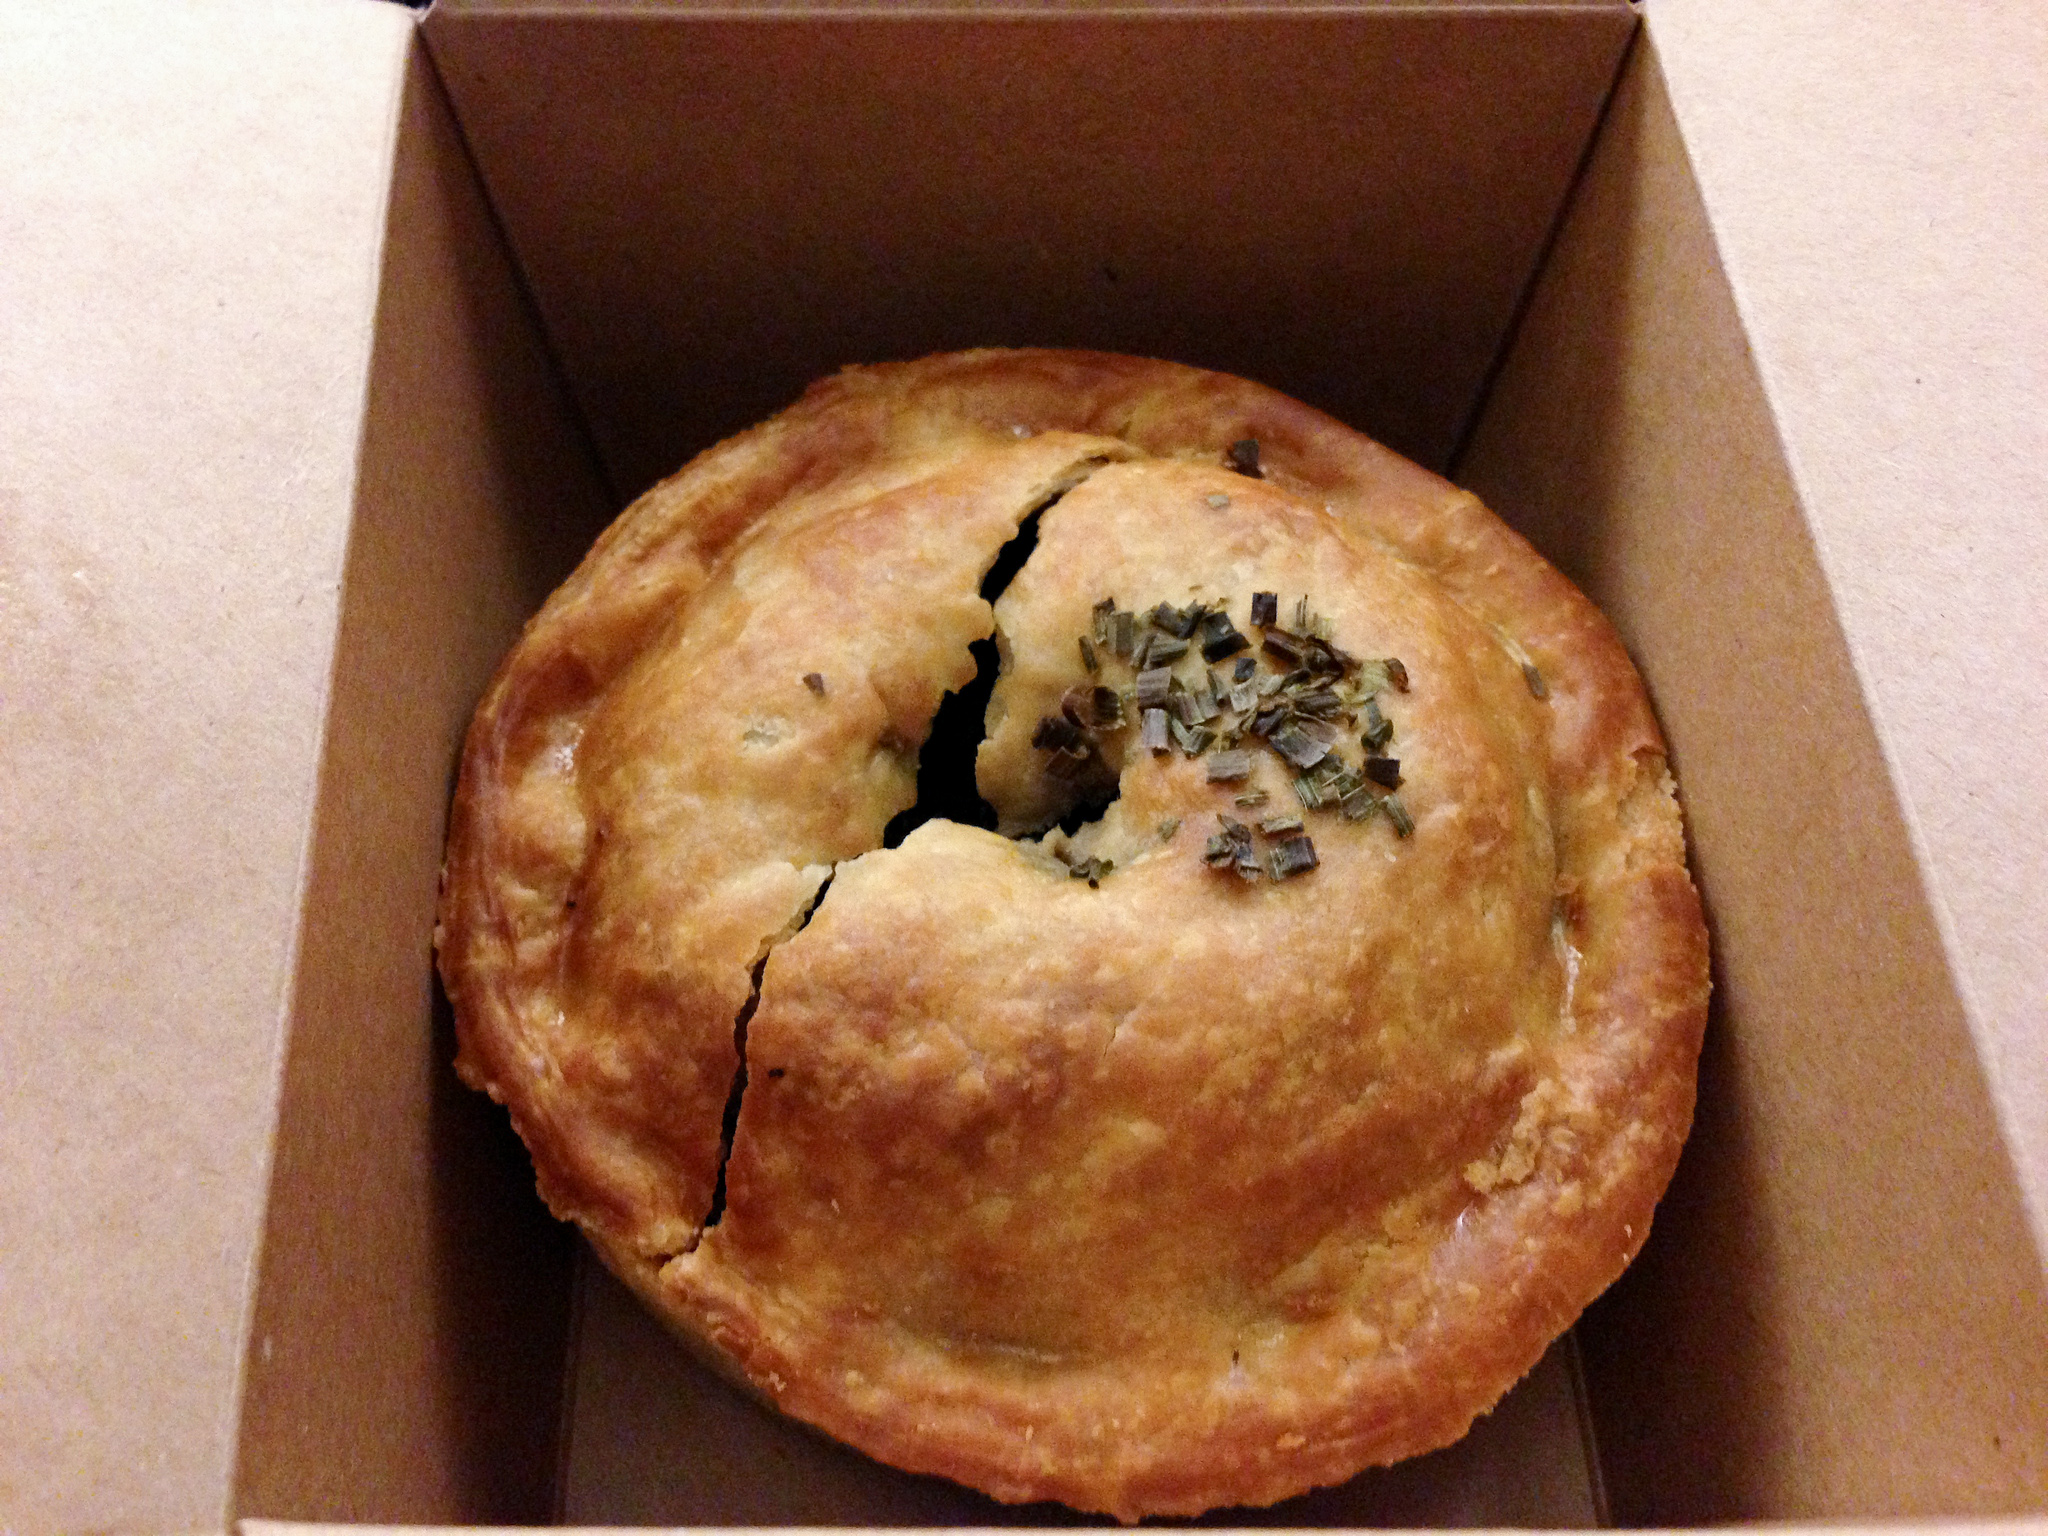 Pie to-go at Pieminister in London. Photo by alphacityguides.